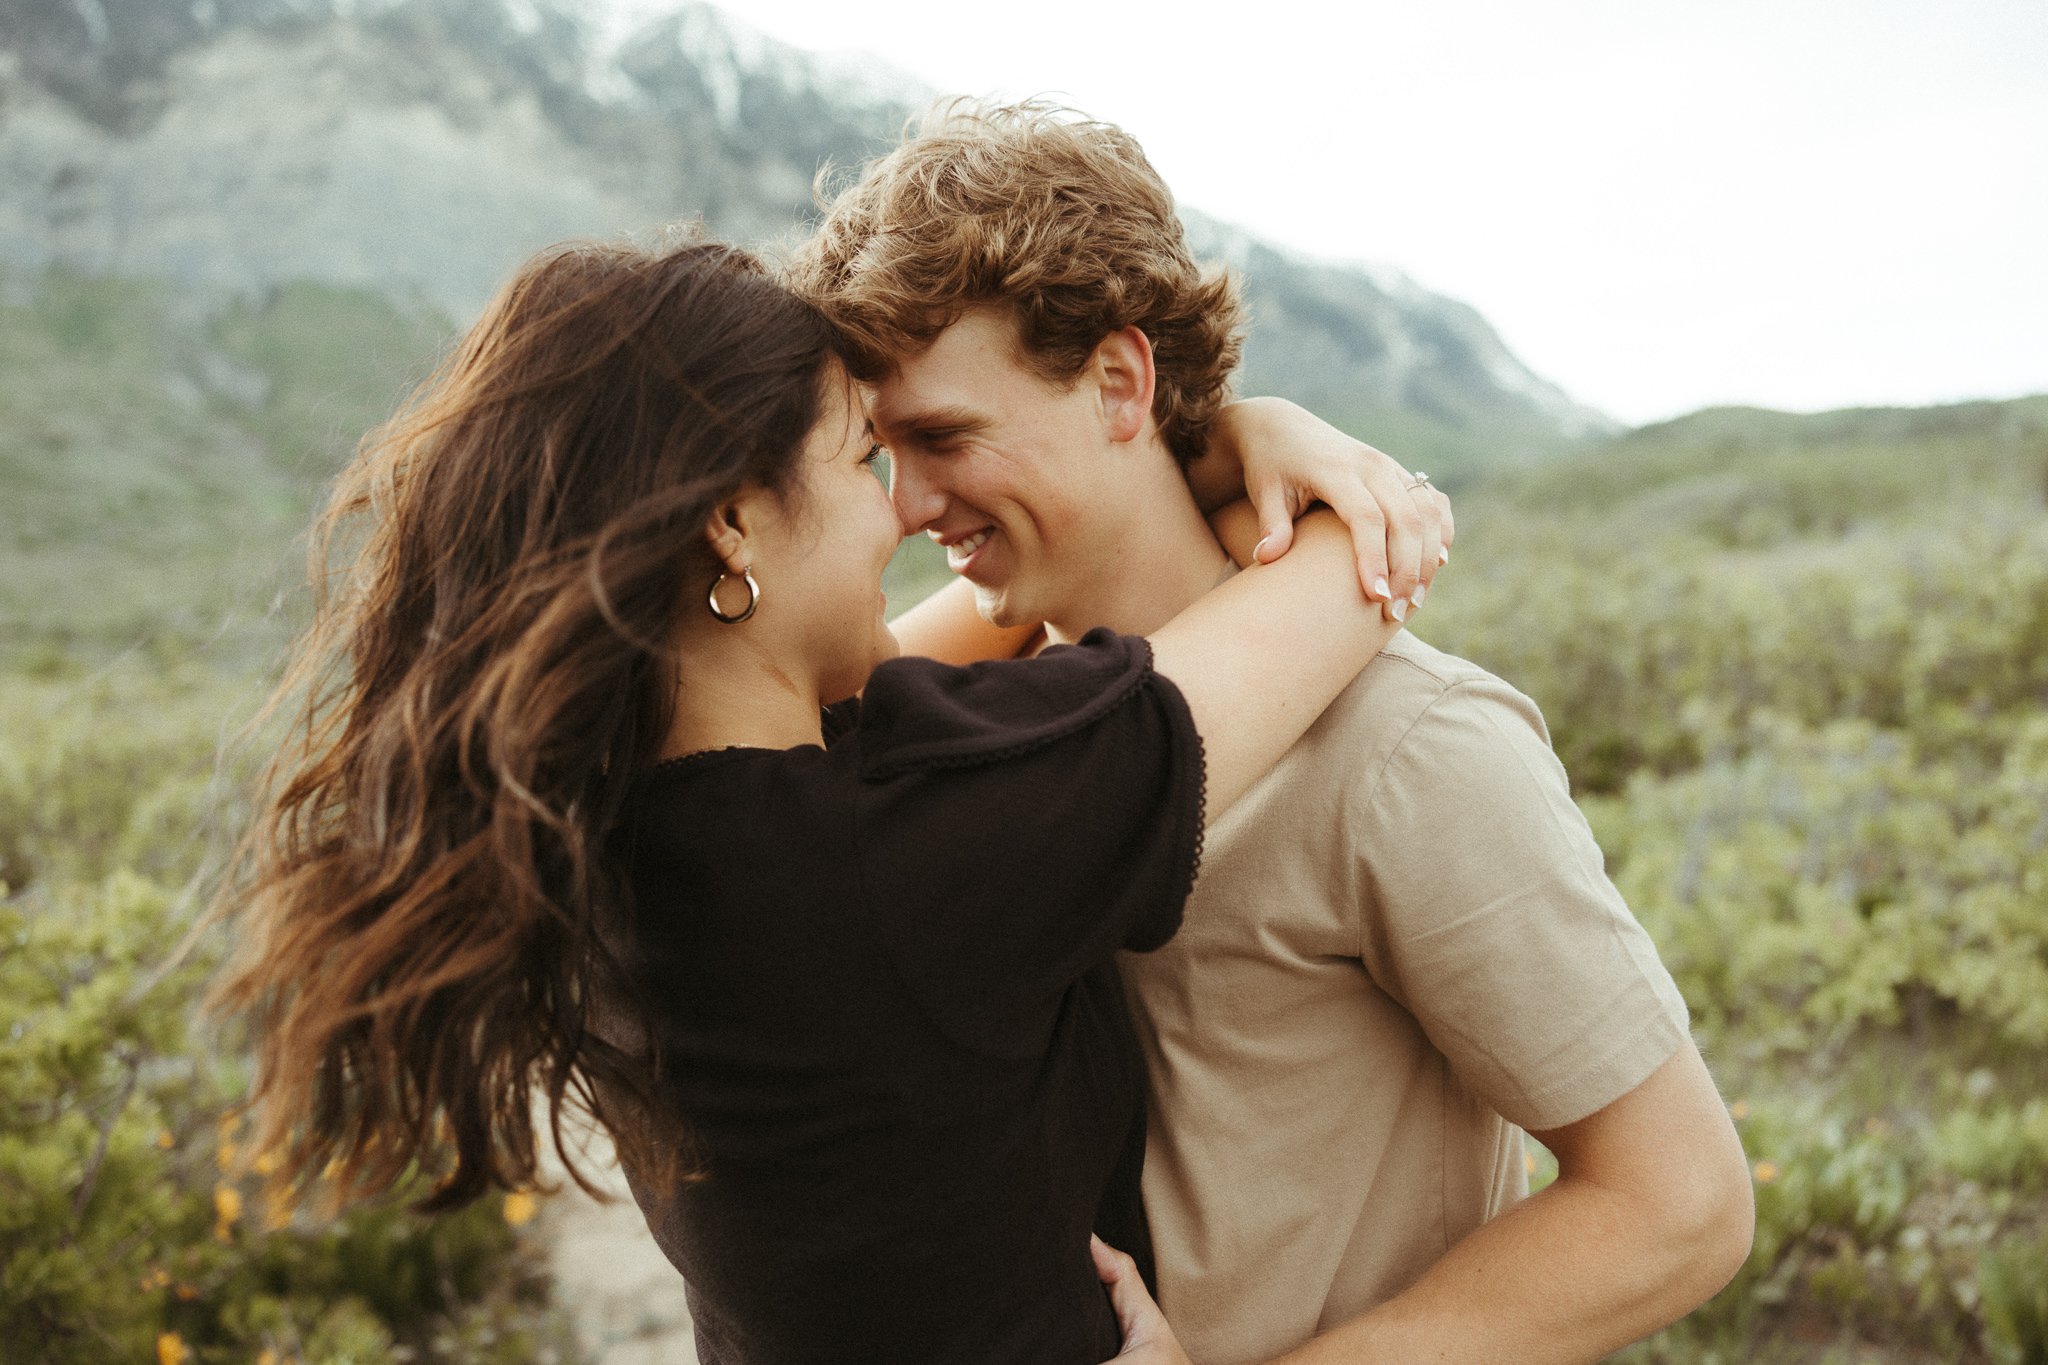 Spring-Provo-Canyon-Wildflowers-Engagement-Session-36